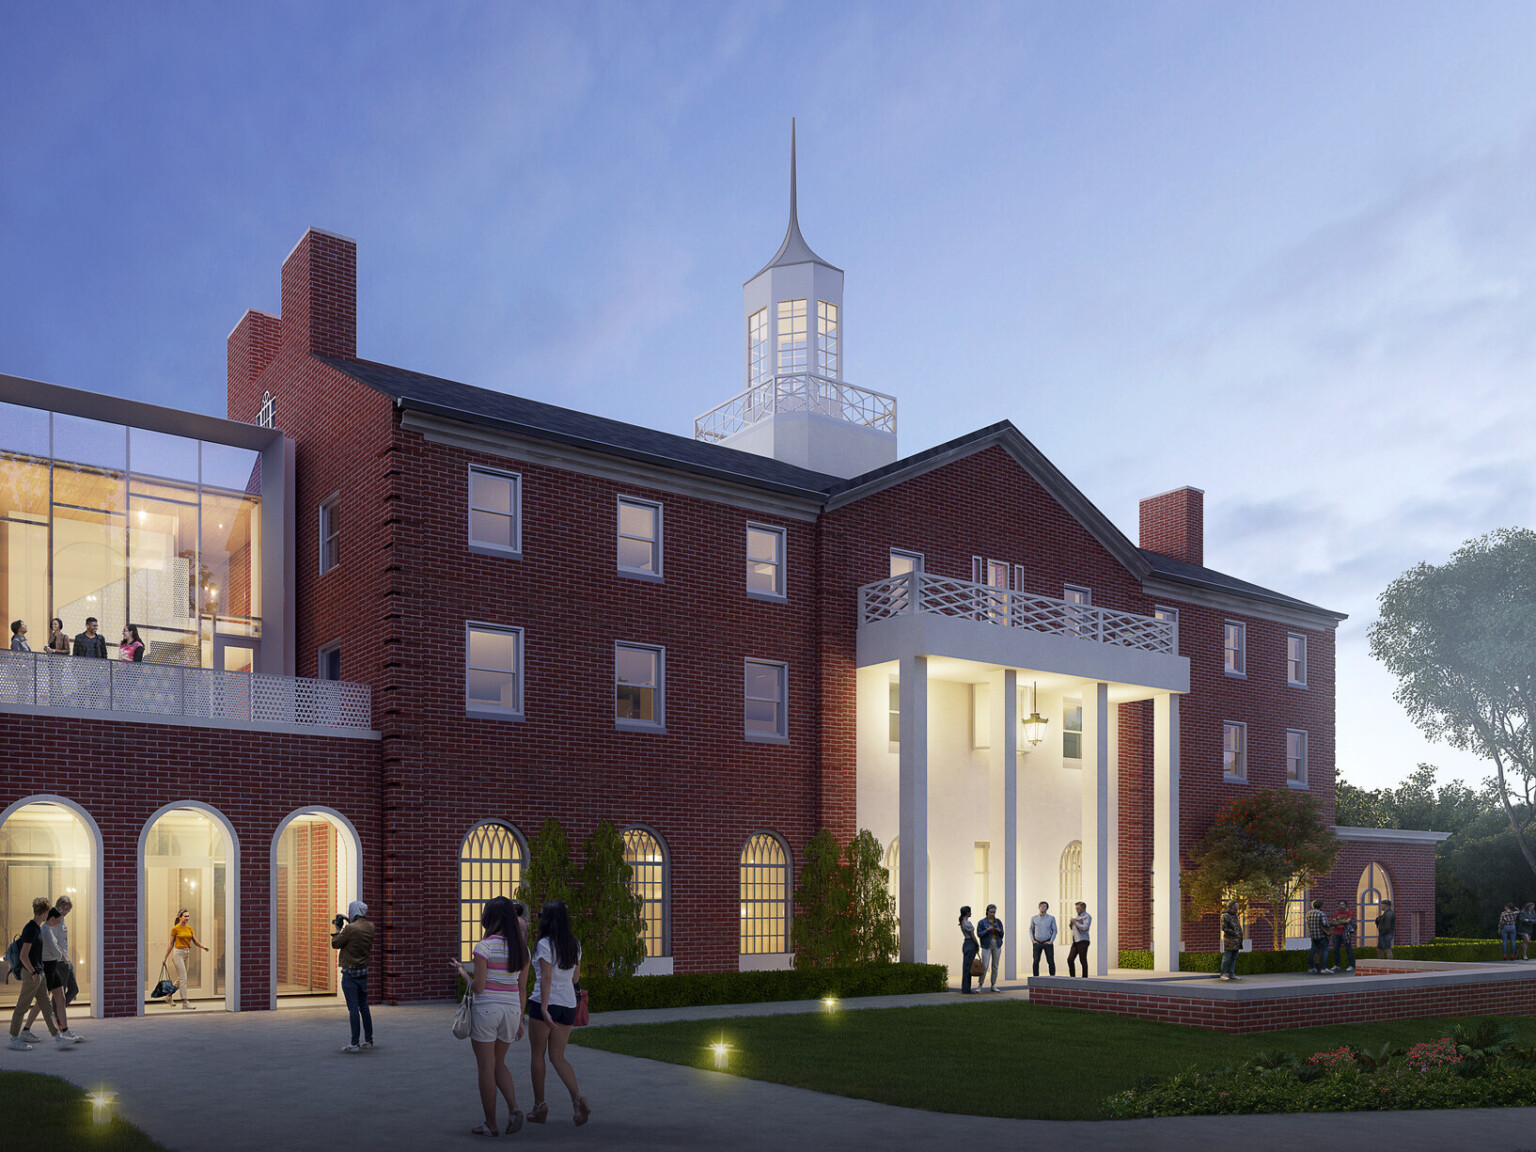 Rendering at dusk of a college campus showing a brick building with white accents with windows filled with light